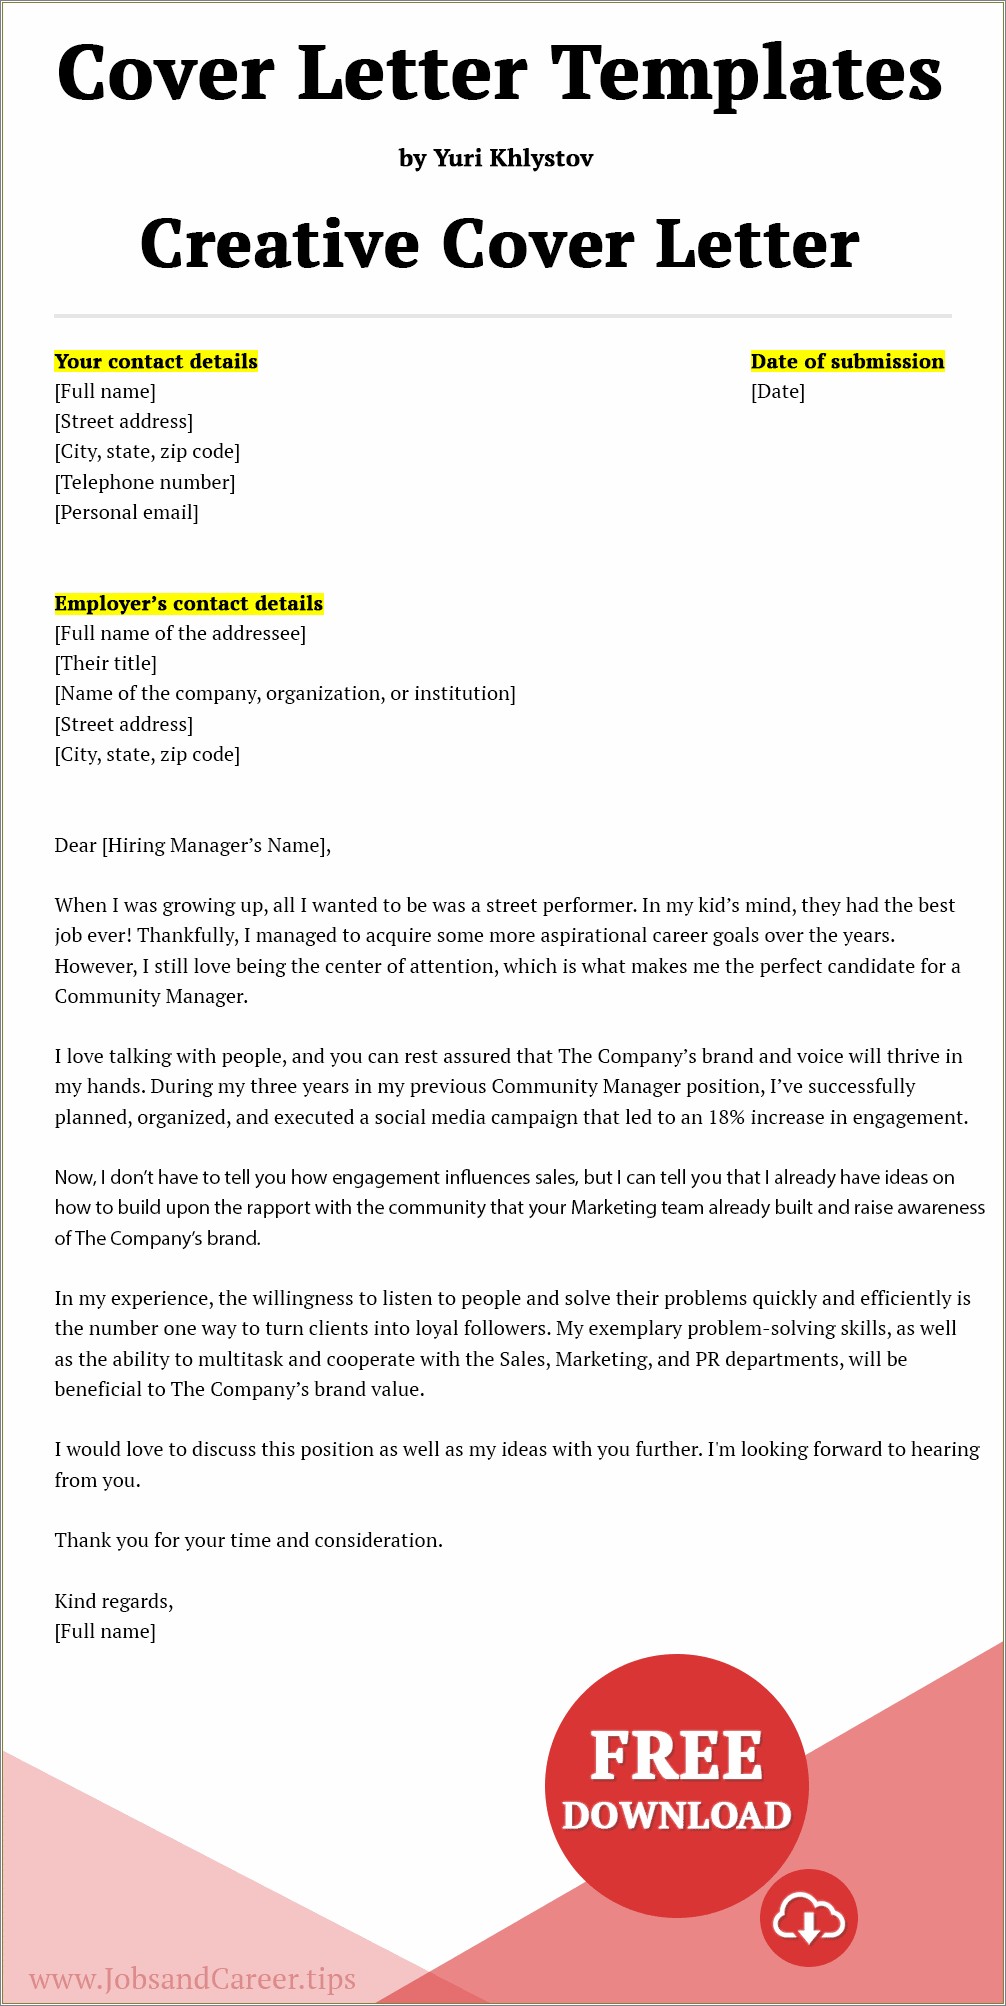 Free Cover Letter Templates For Director Position